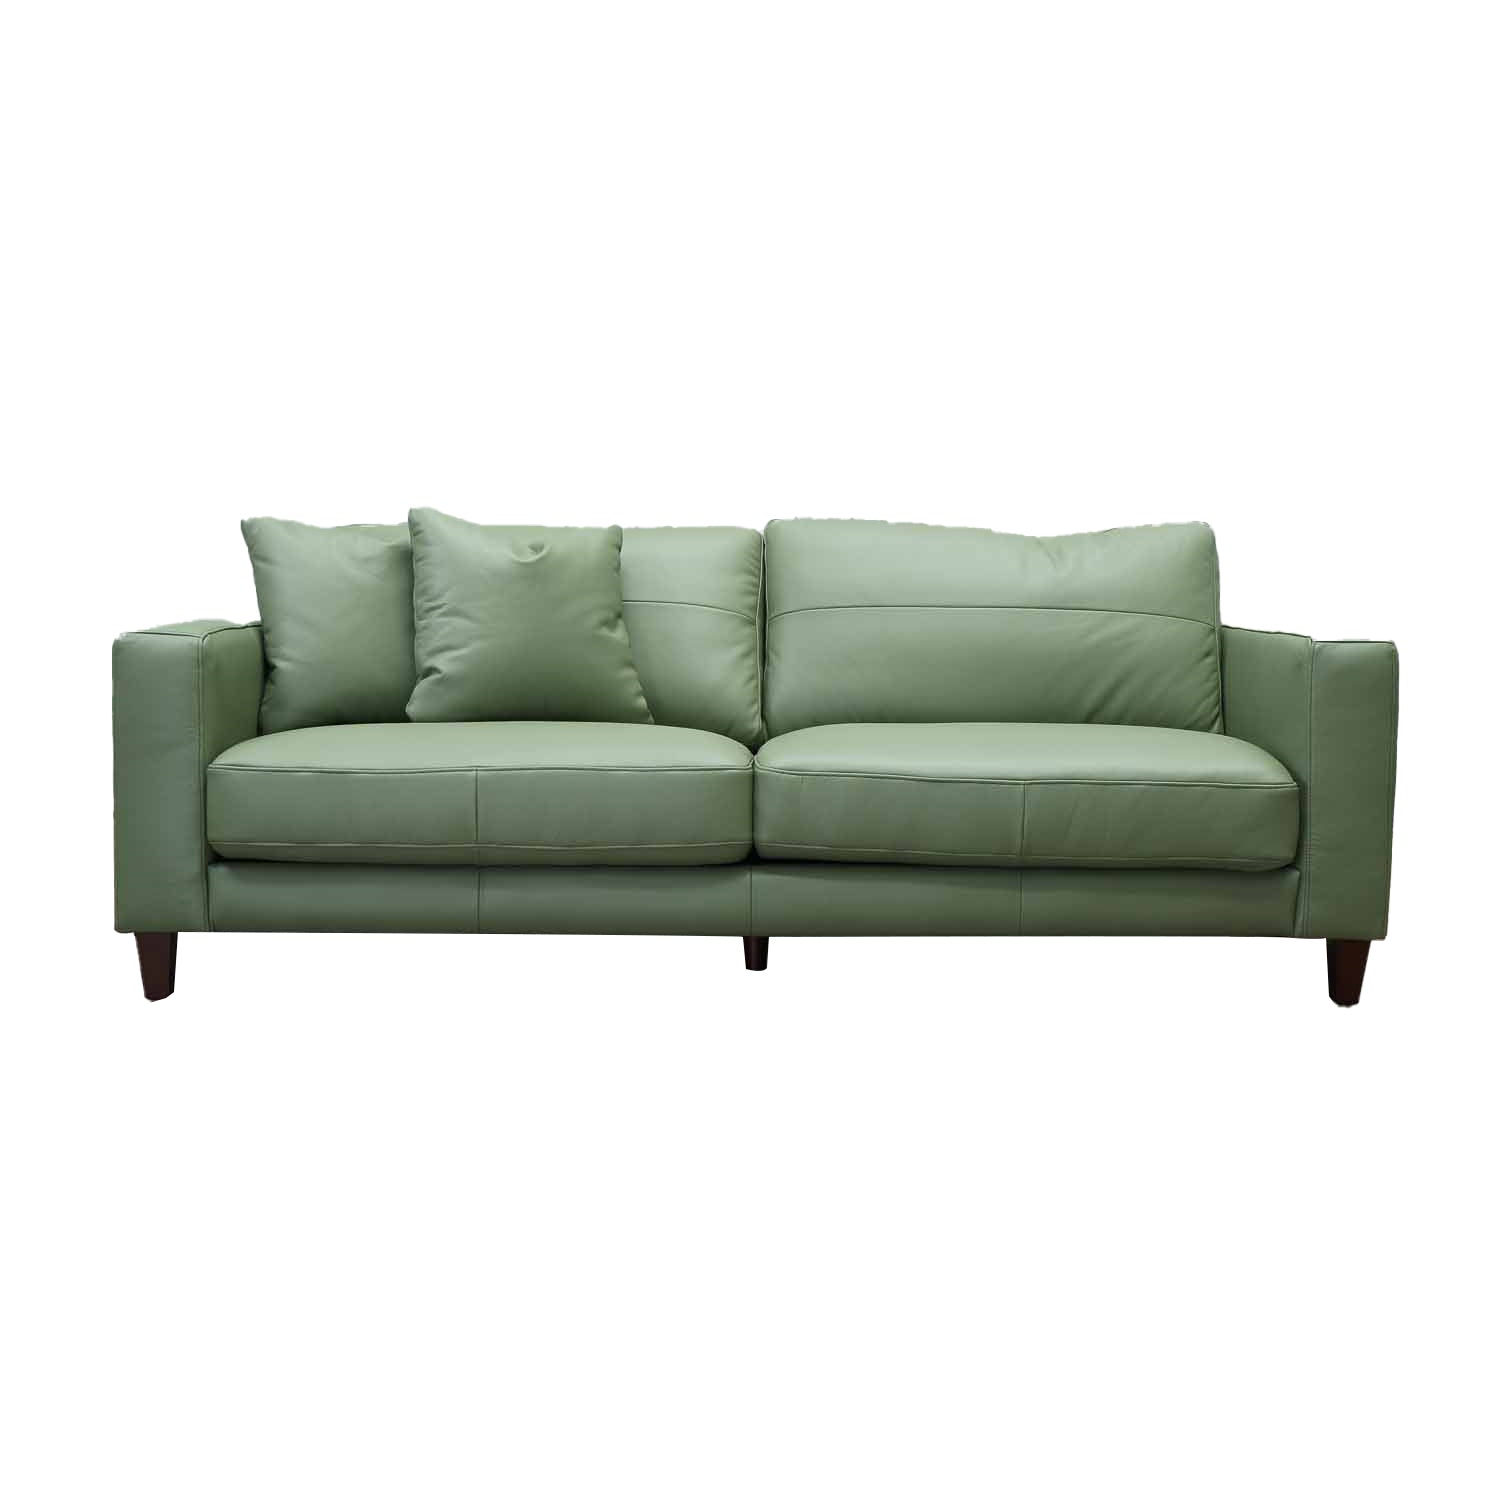 Imperfect Chelsea Petite 3 Seat in Myrtle Green